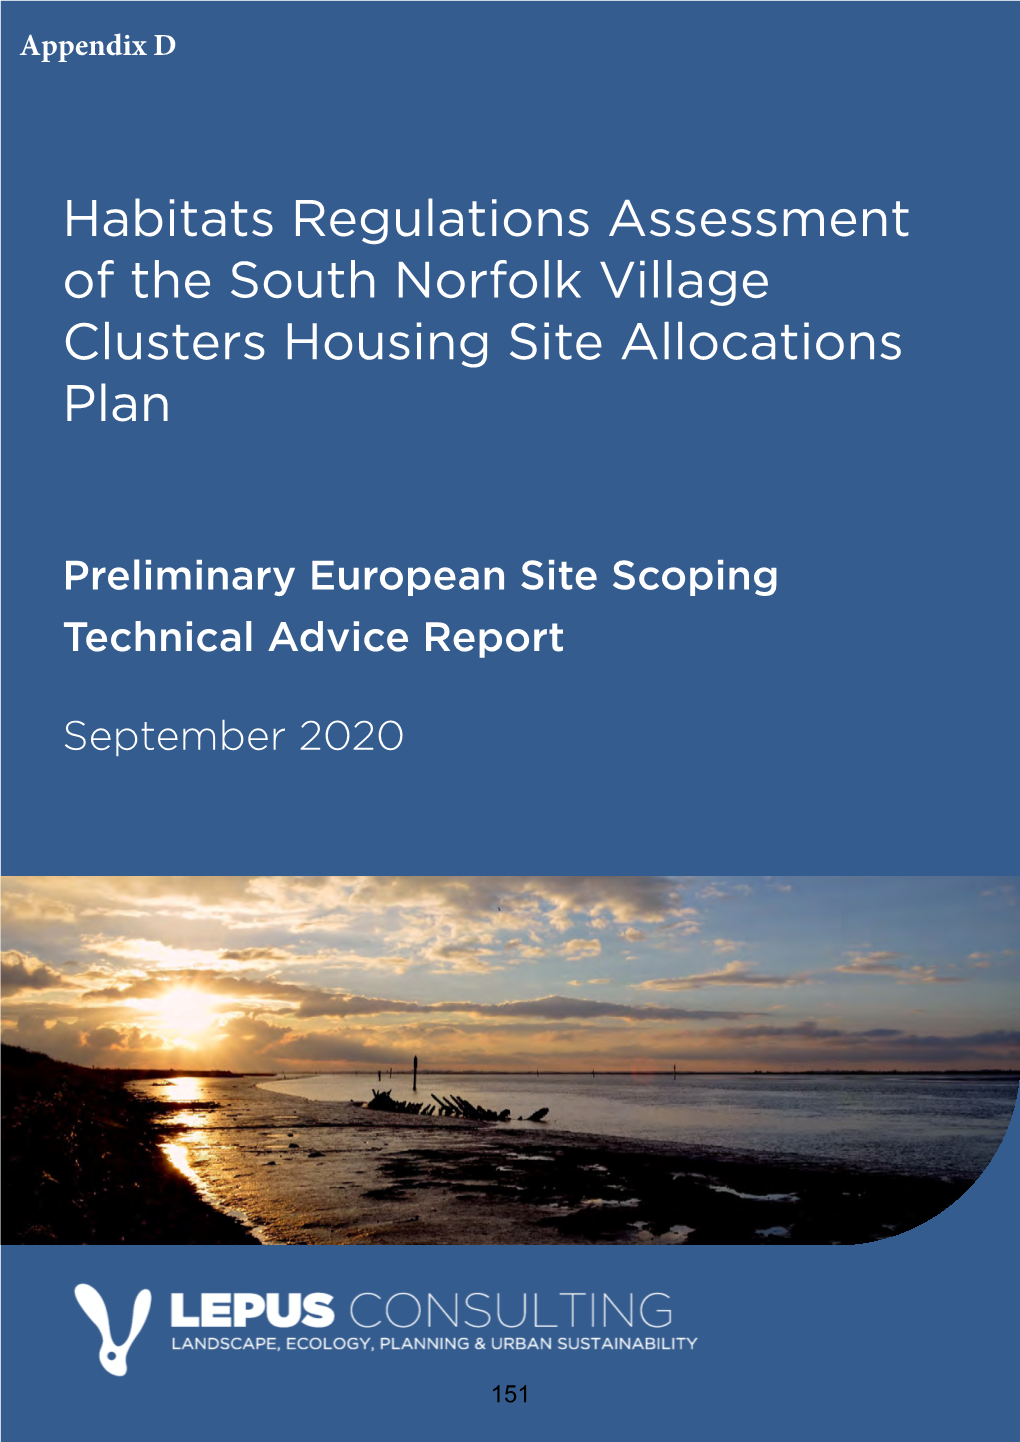 Habitats Regulations Assessment of the South Norfolk Village Clusters Housing Site Allocations Plan